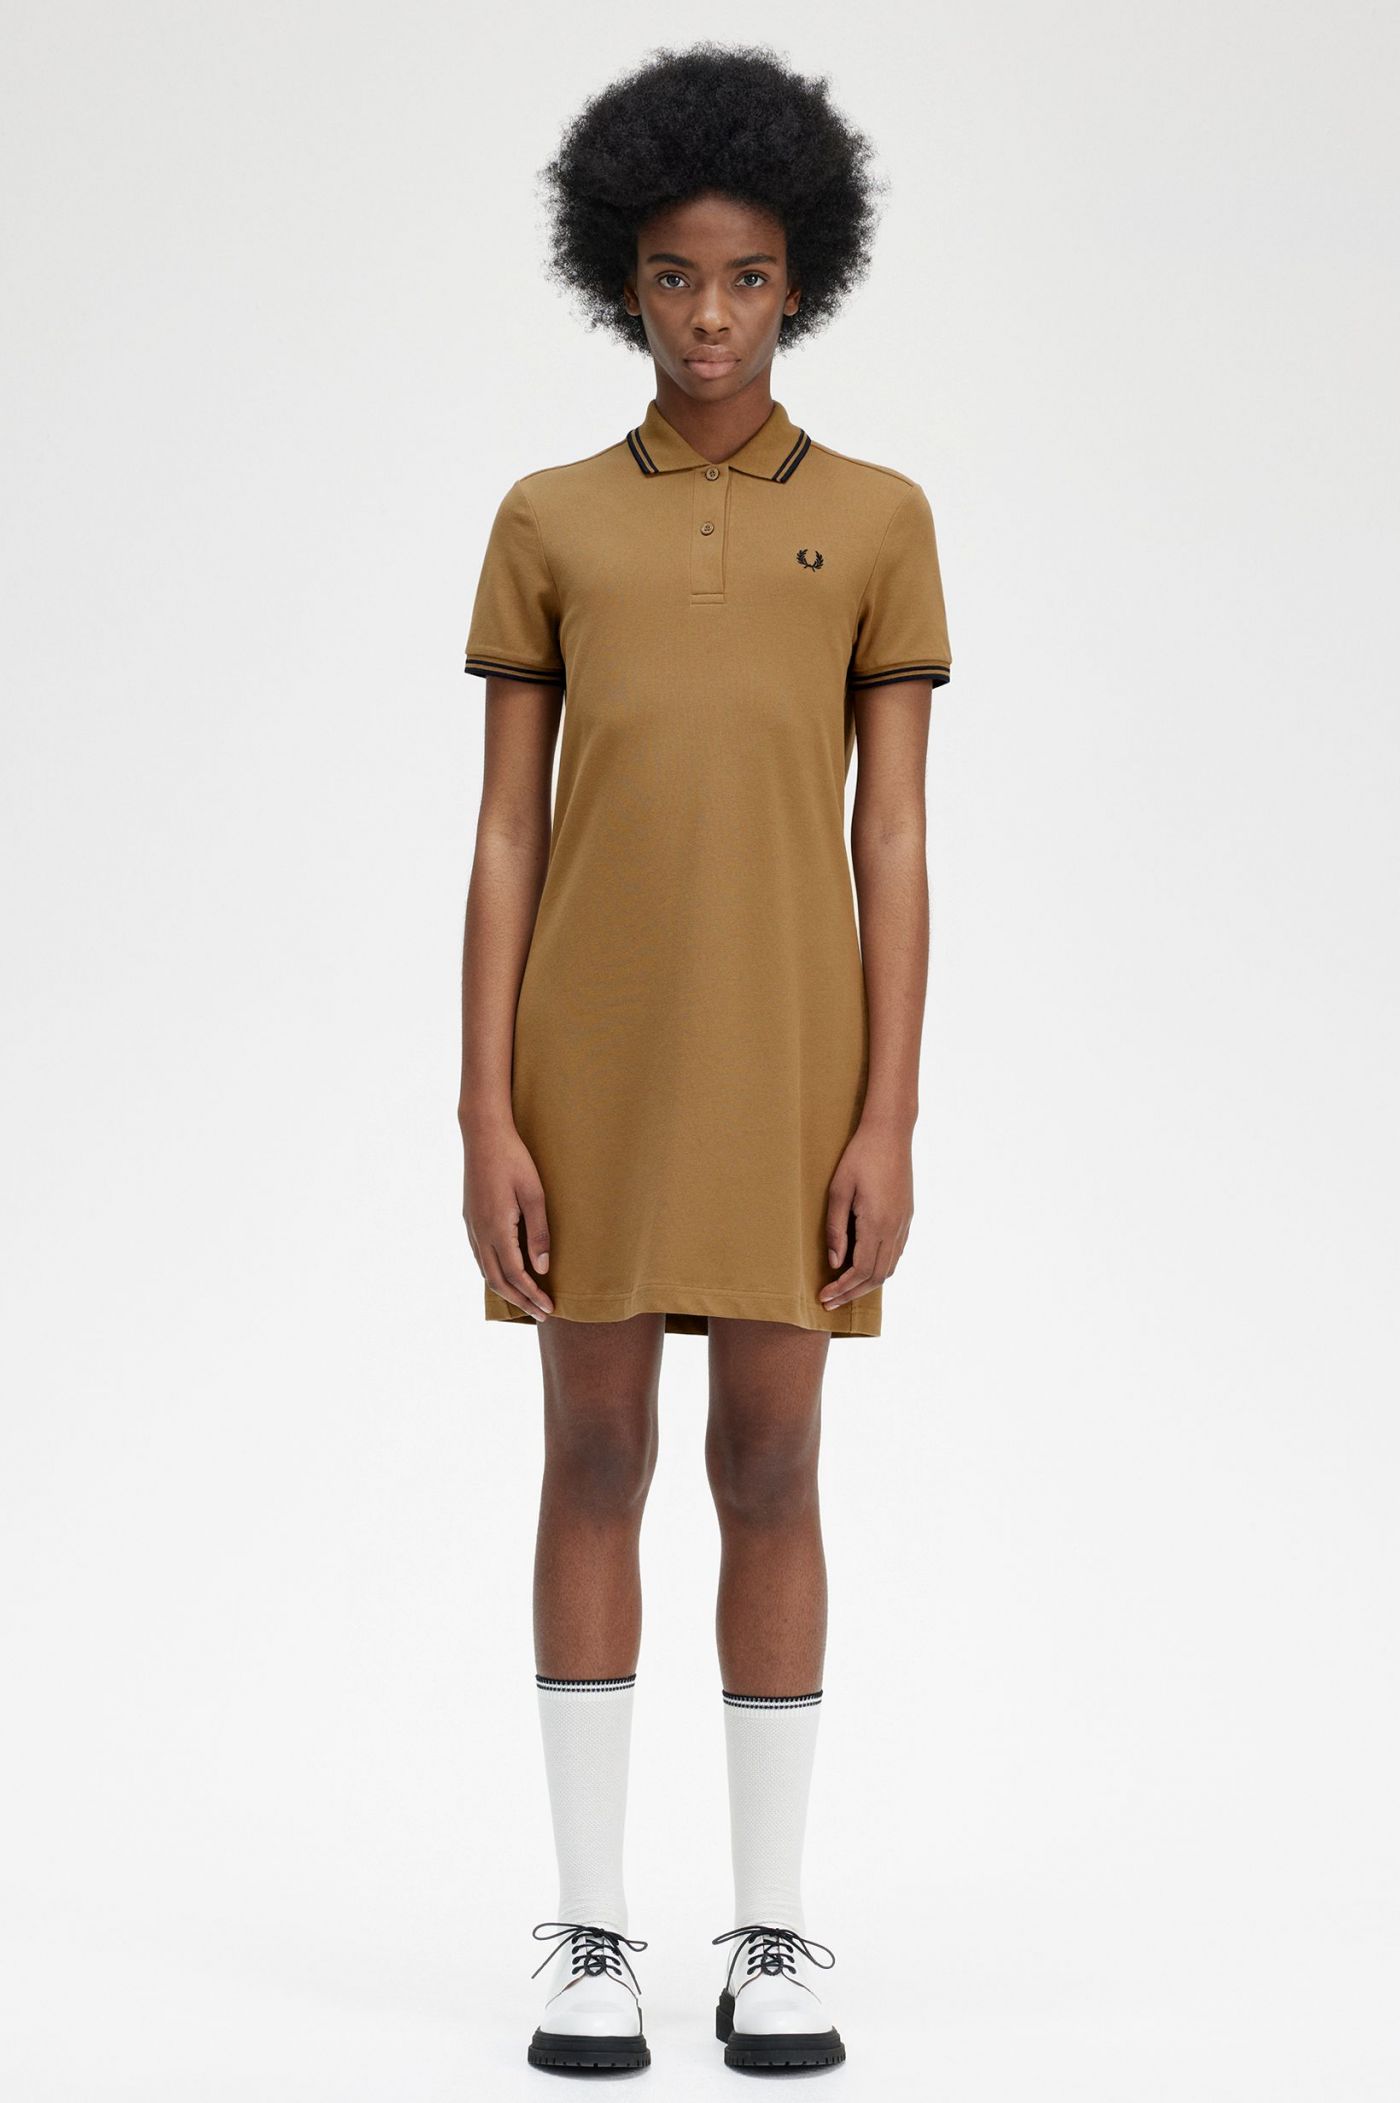 Twin Tipped Fred Perry Shirt Dress - Shaded Stone | Women's ...